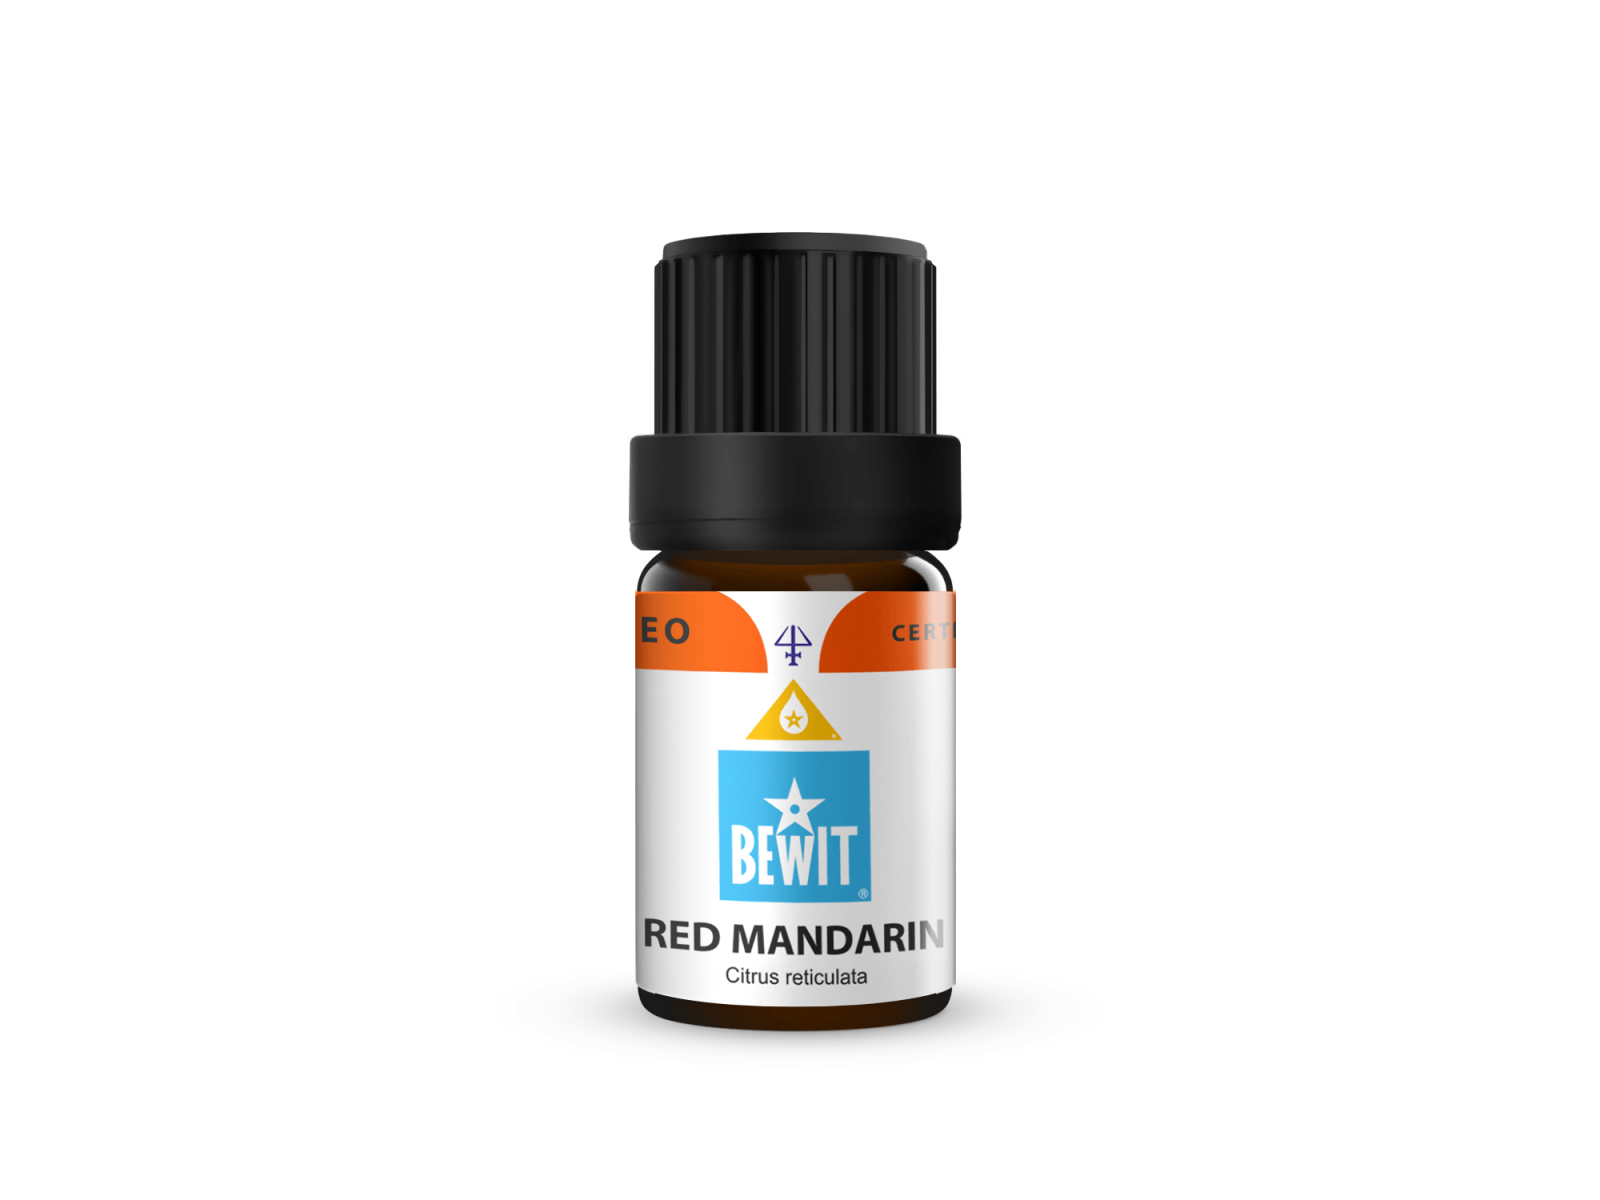 BEWIT Mandarin red - 100% pure and natural CTEO® essential oil - 4